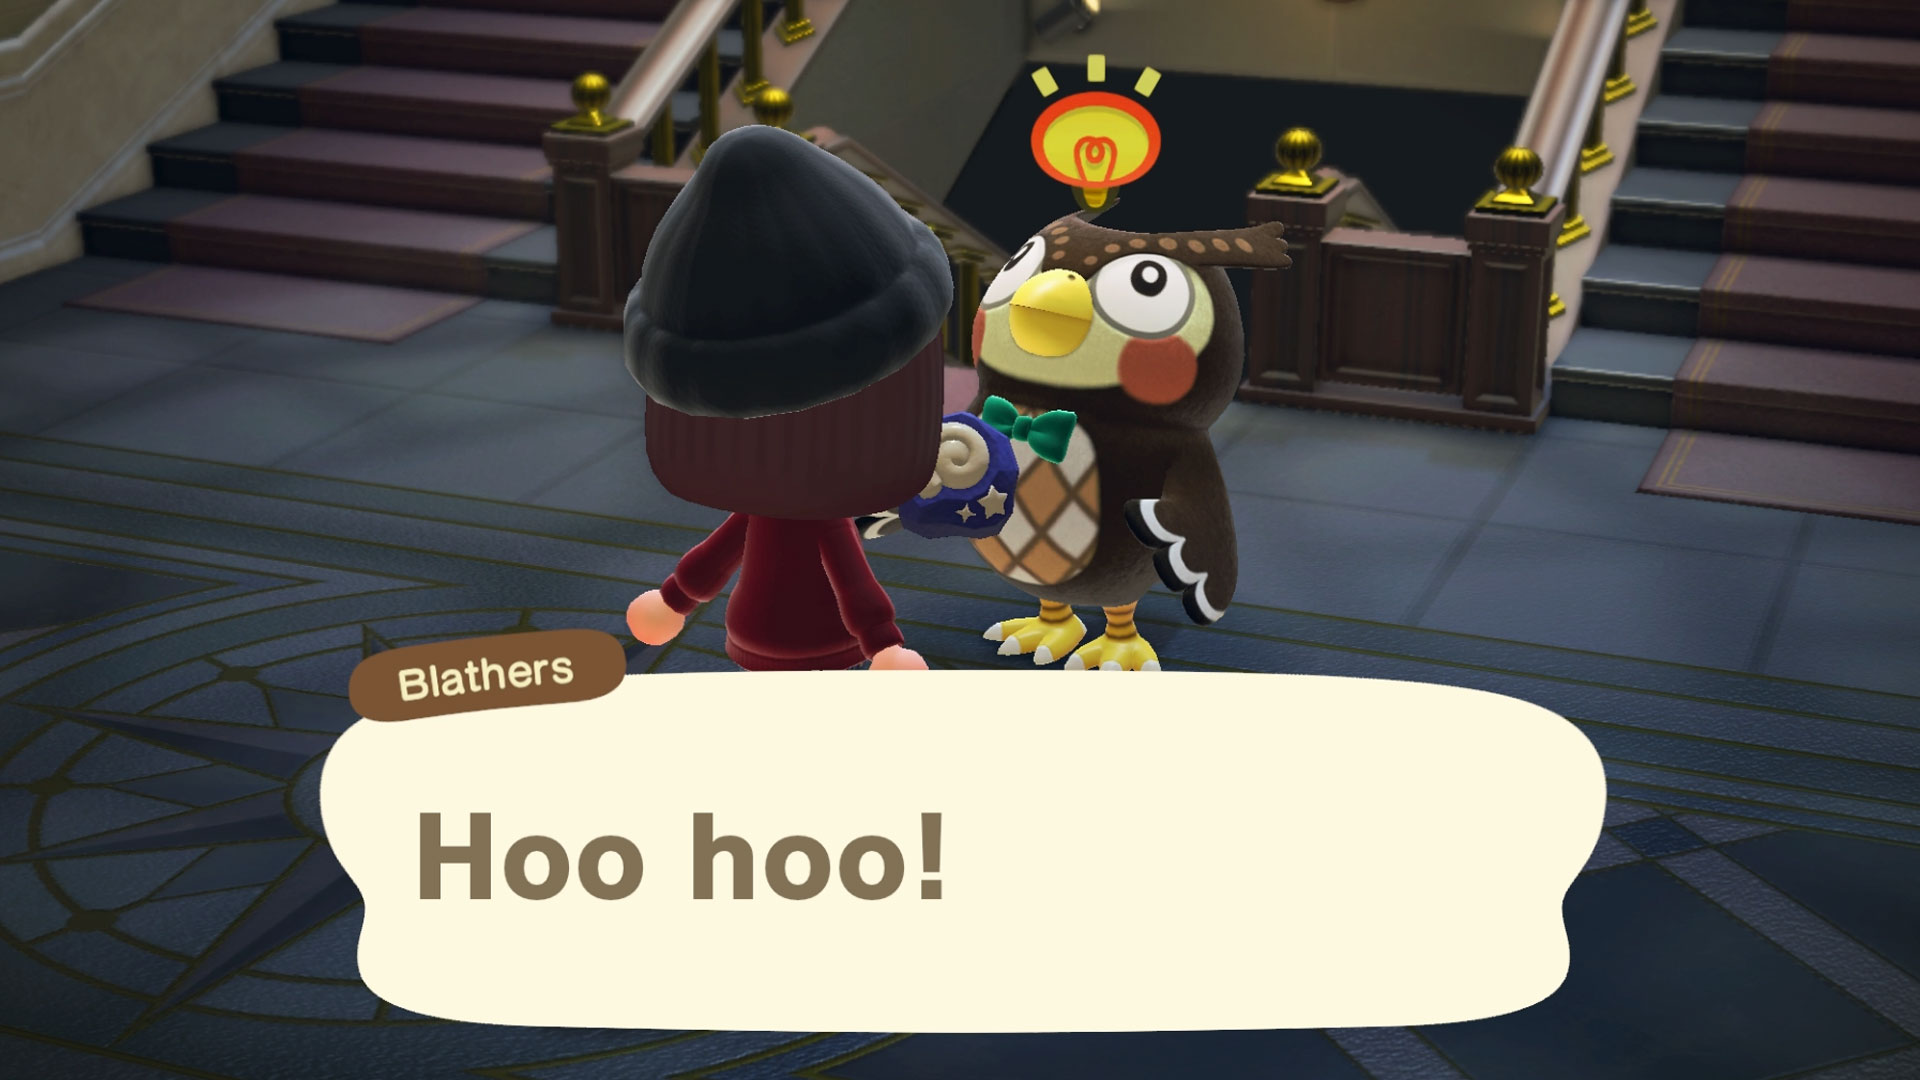 How to build the museum in Animal Crossing: New Horizons | GamesRadar+